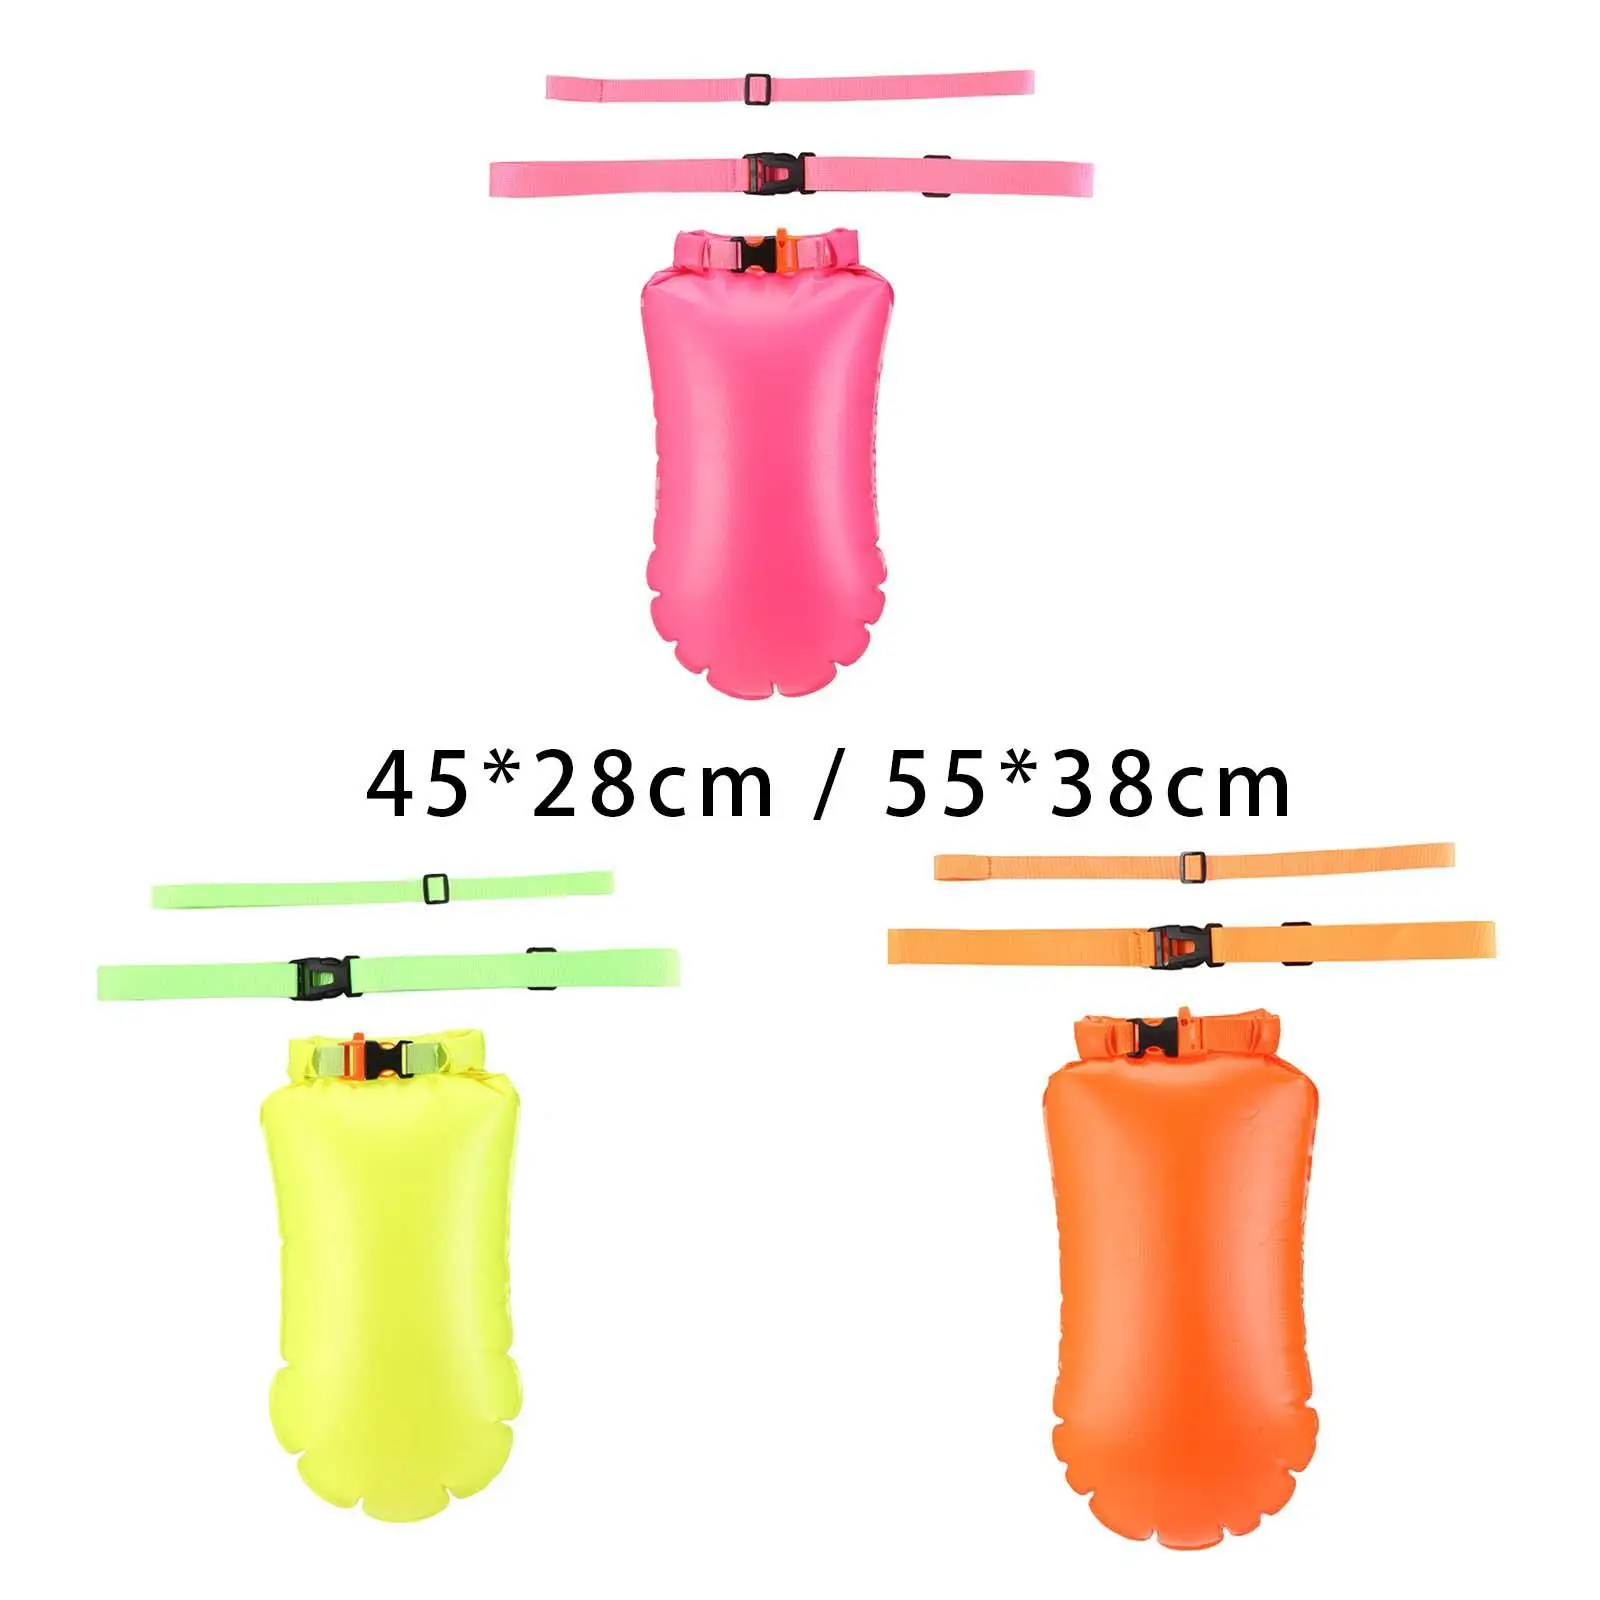 Safety Swim Buoy Waterproof Bag High Visible with Adjustable Belt Swimming Tow Bag for Boating Surfing Kayak Swimming Pool Lake